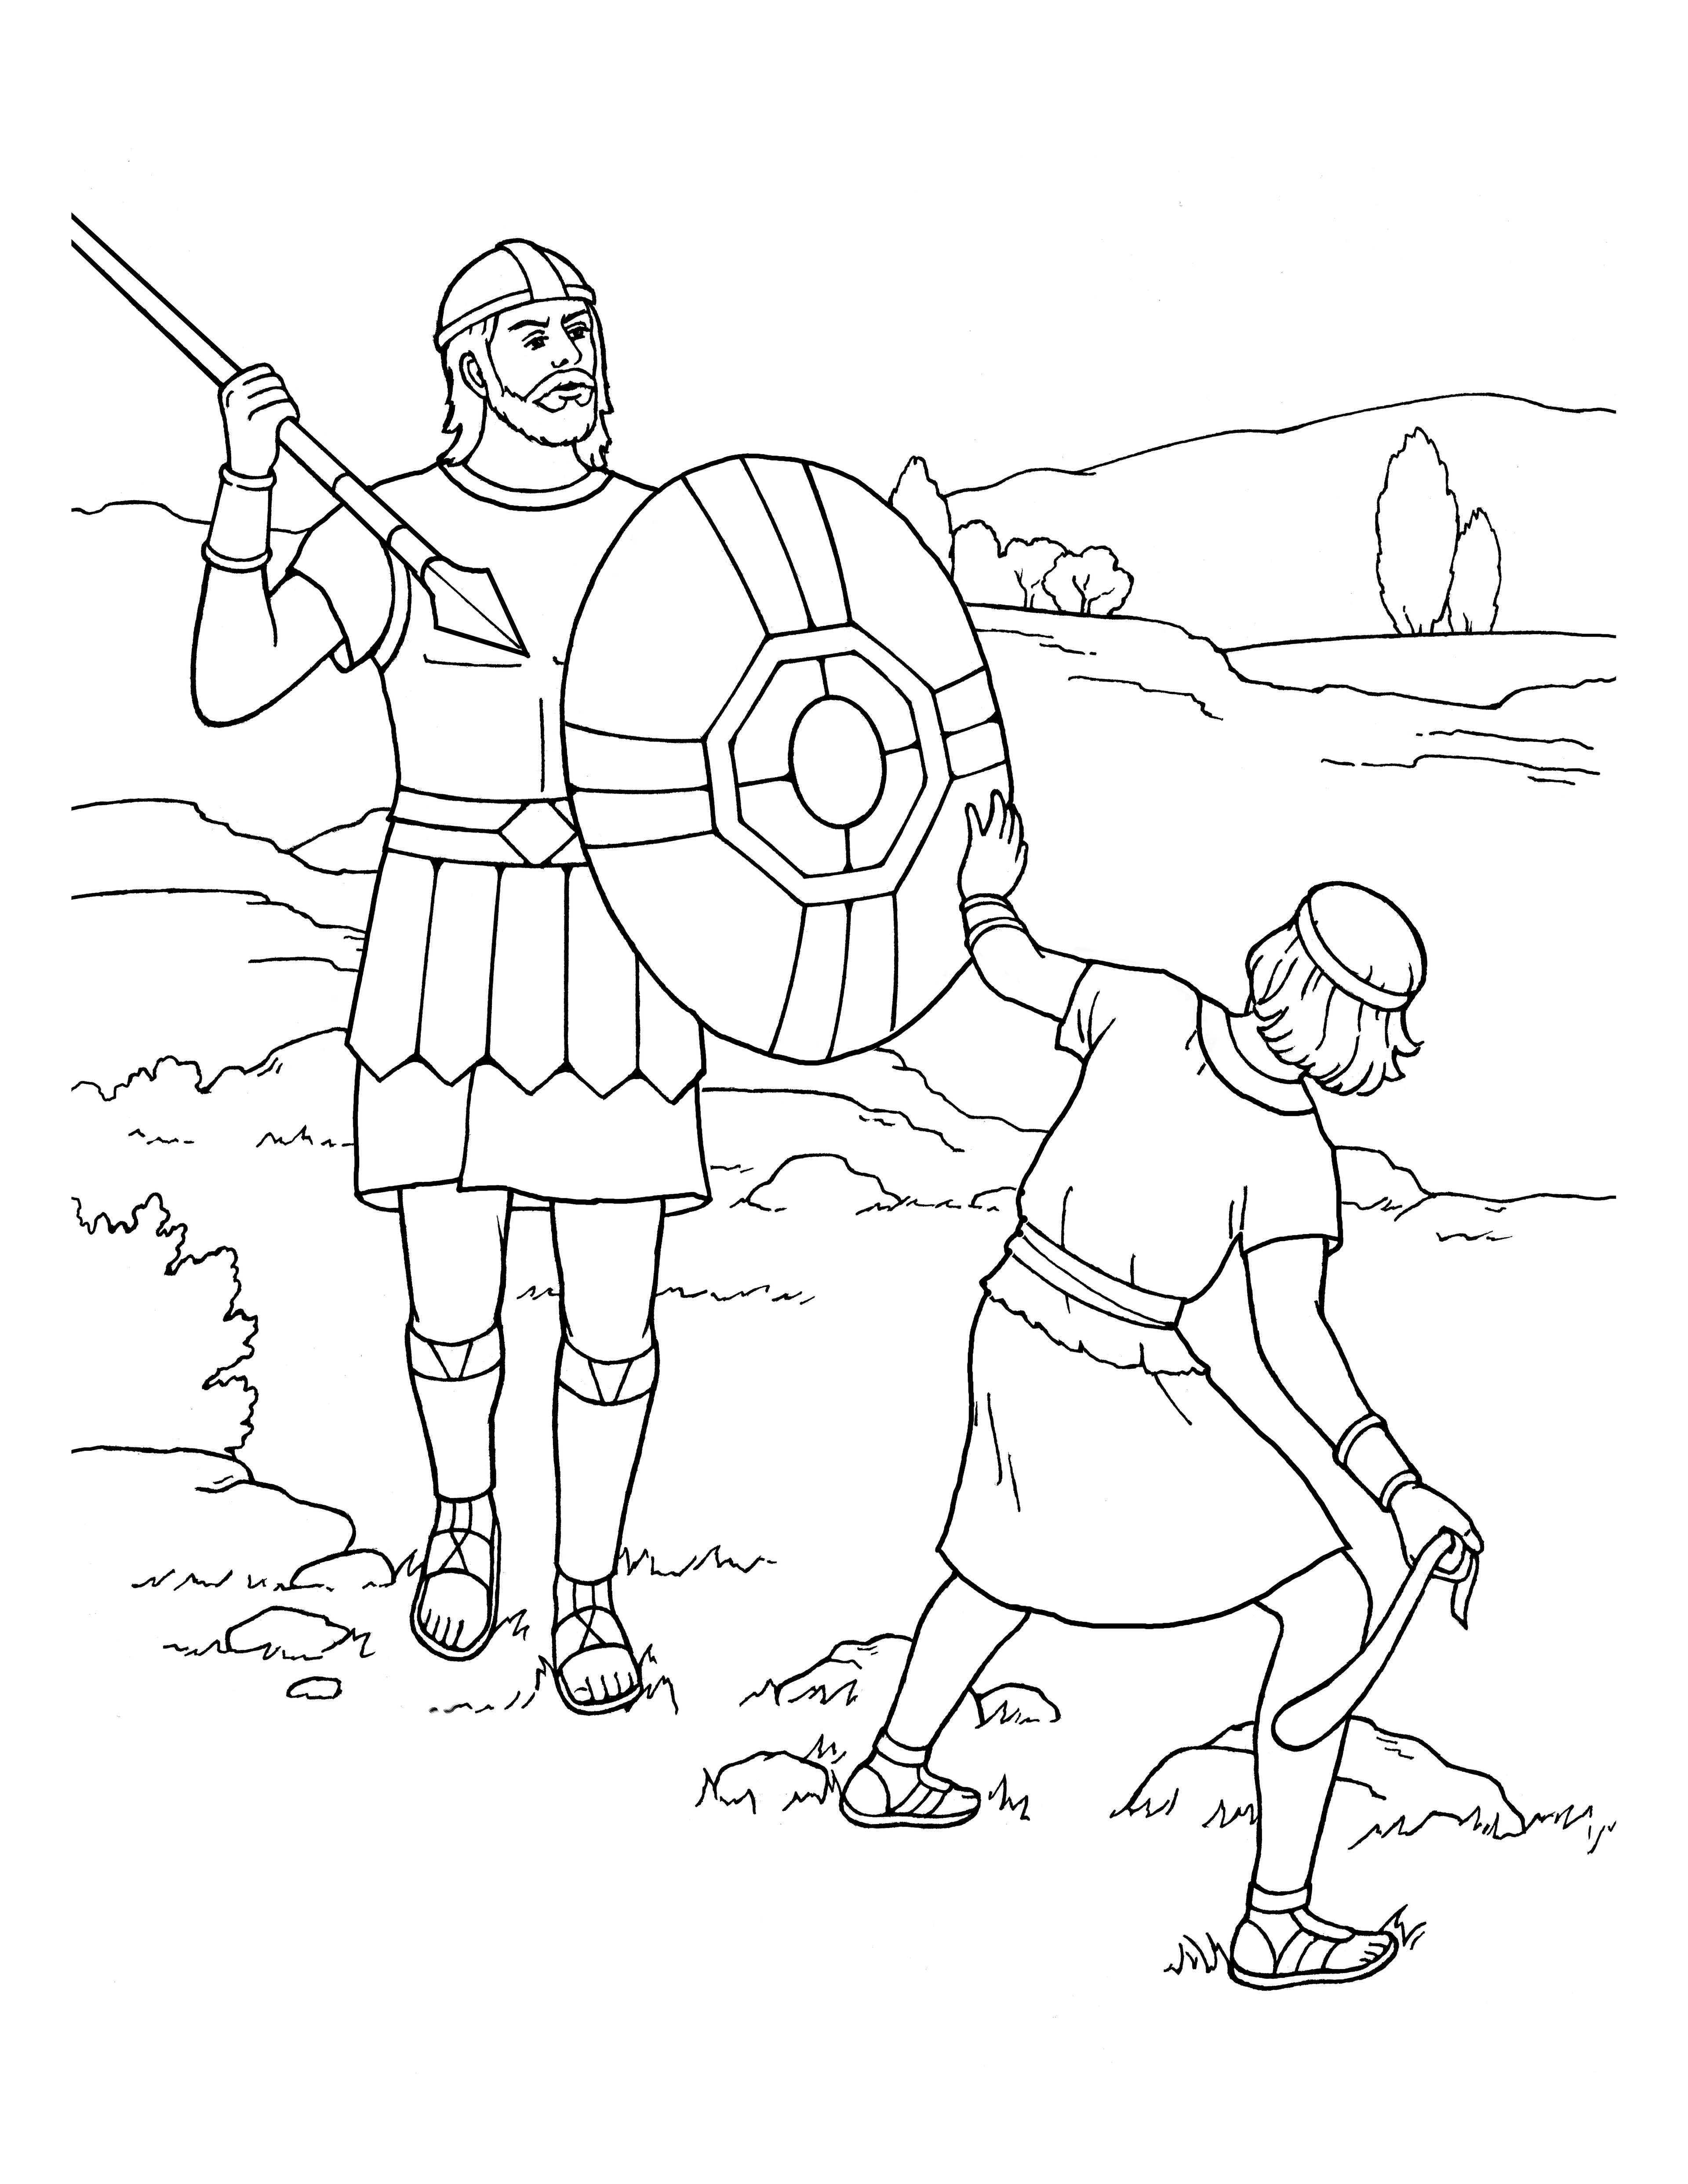 An illustration of David and Goliath.